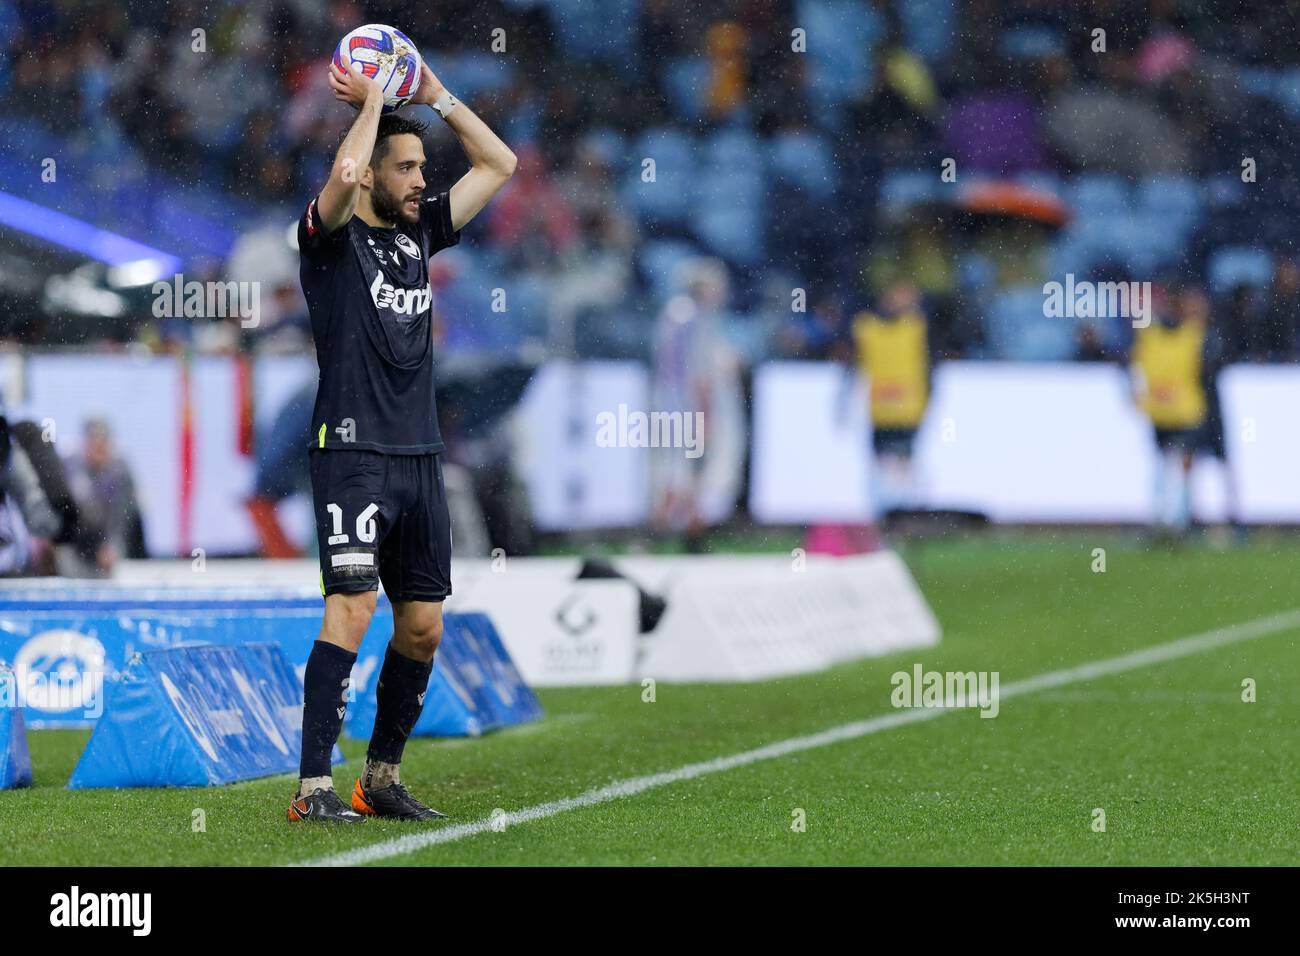 SYDNEY, AUSTRALIA - OCTOBER 8: Nani of Melbourne Victory FC prepares to throw the ball during round one A-League Men's match between Sydney FC and Melbourne Victory at Allianz Stadium, on October 8, 2022 in Sydney, Australia Stock Photo